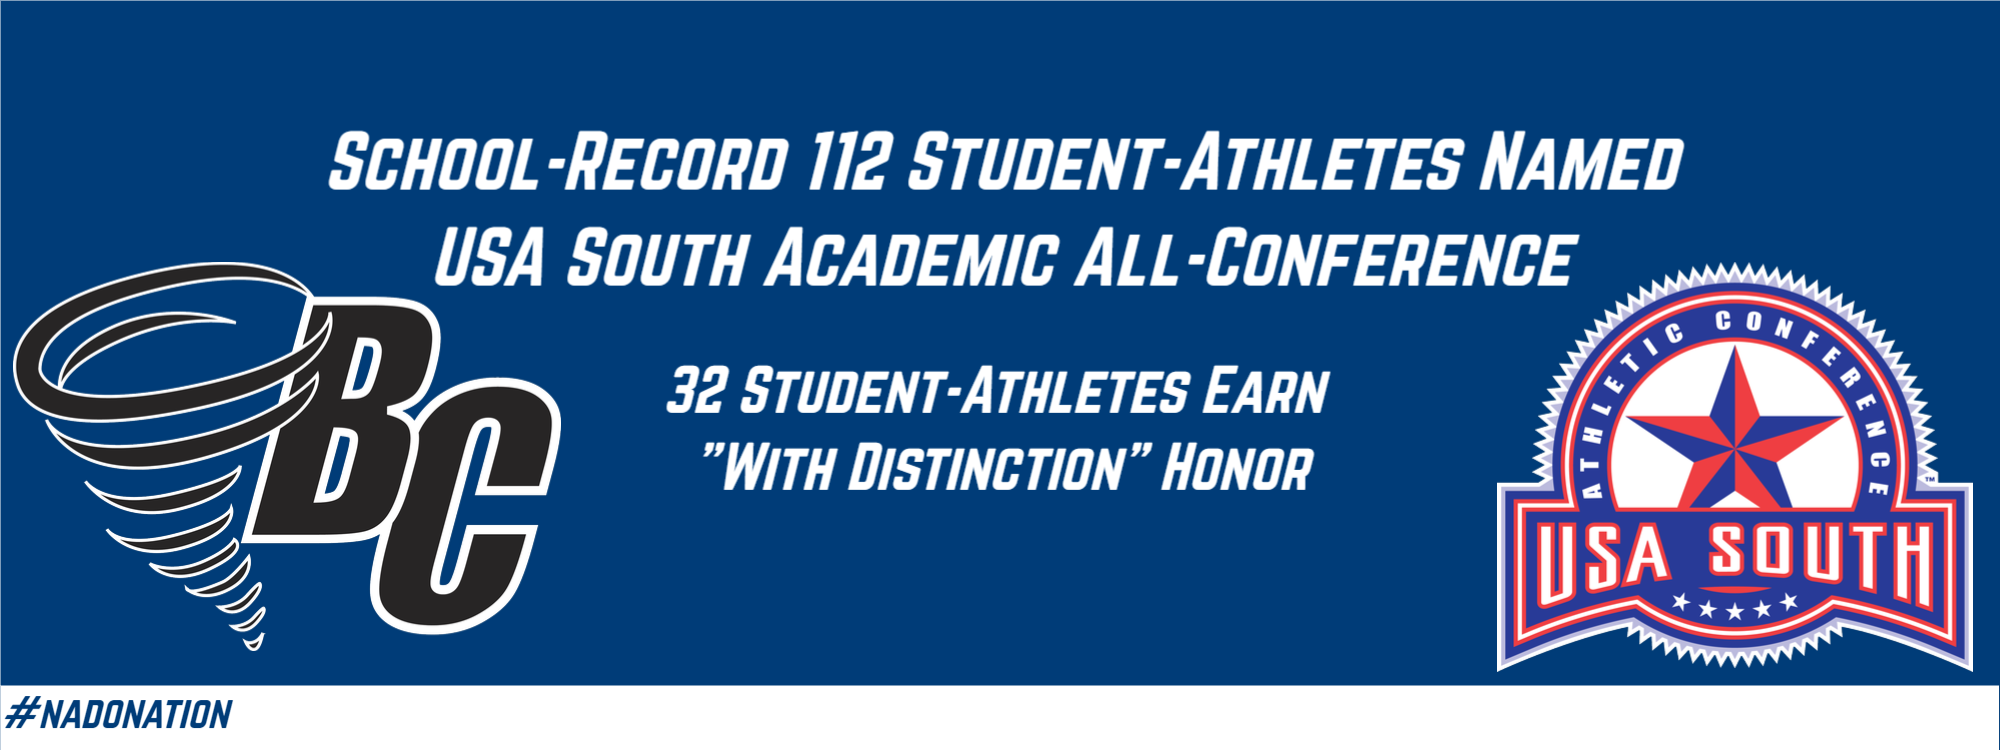 112 Brevard College Student-Athletes Selected to USA South Academic All-Conference Team